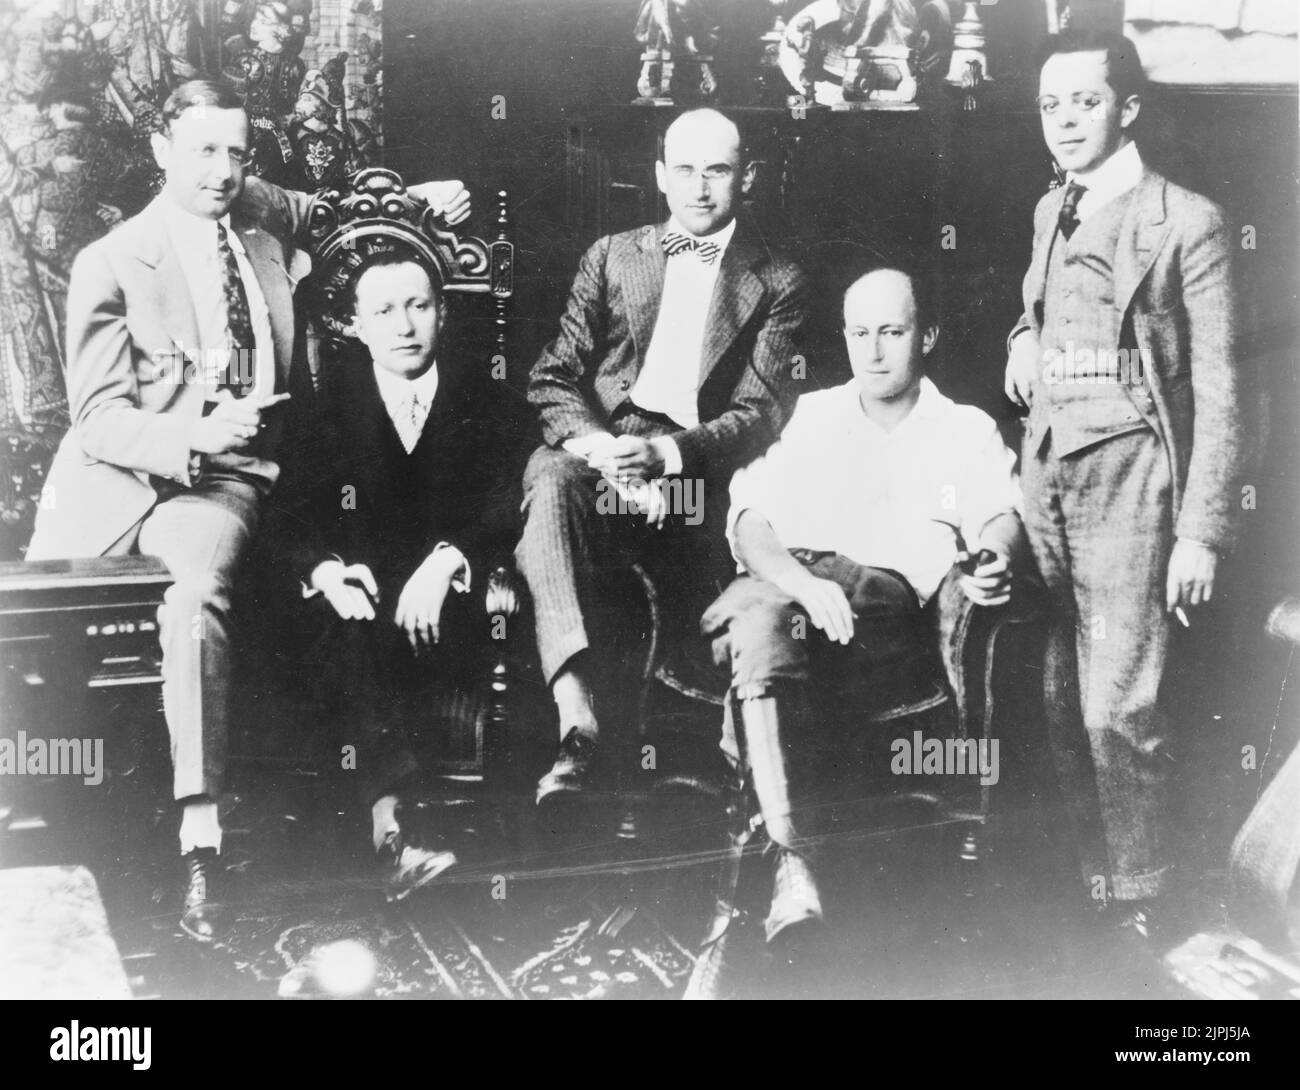 Members of the Famous Players-Lasky Corporation: left to right: Jesse L. Lasky, Adolph Zukor, Samuel Goldwyn, Cecil B. DeMlle and Al Kaufman Stock Photo